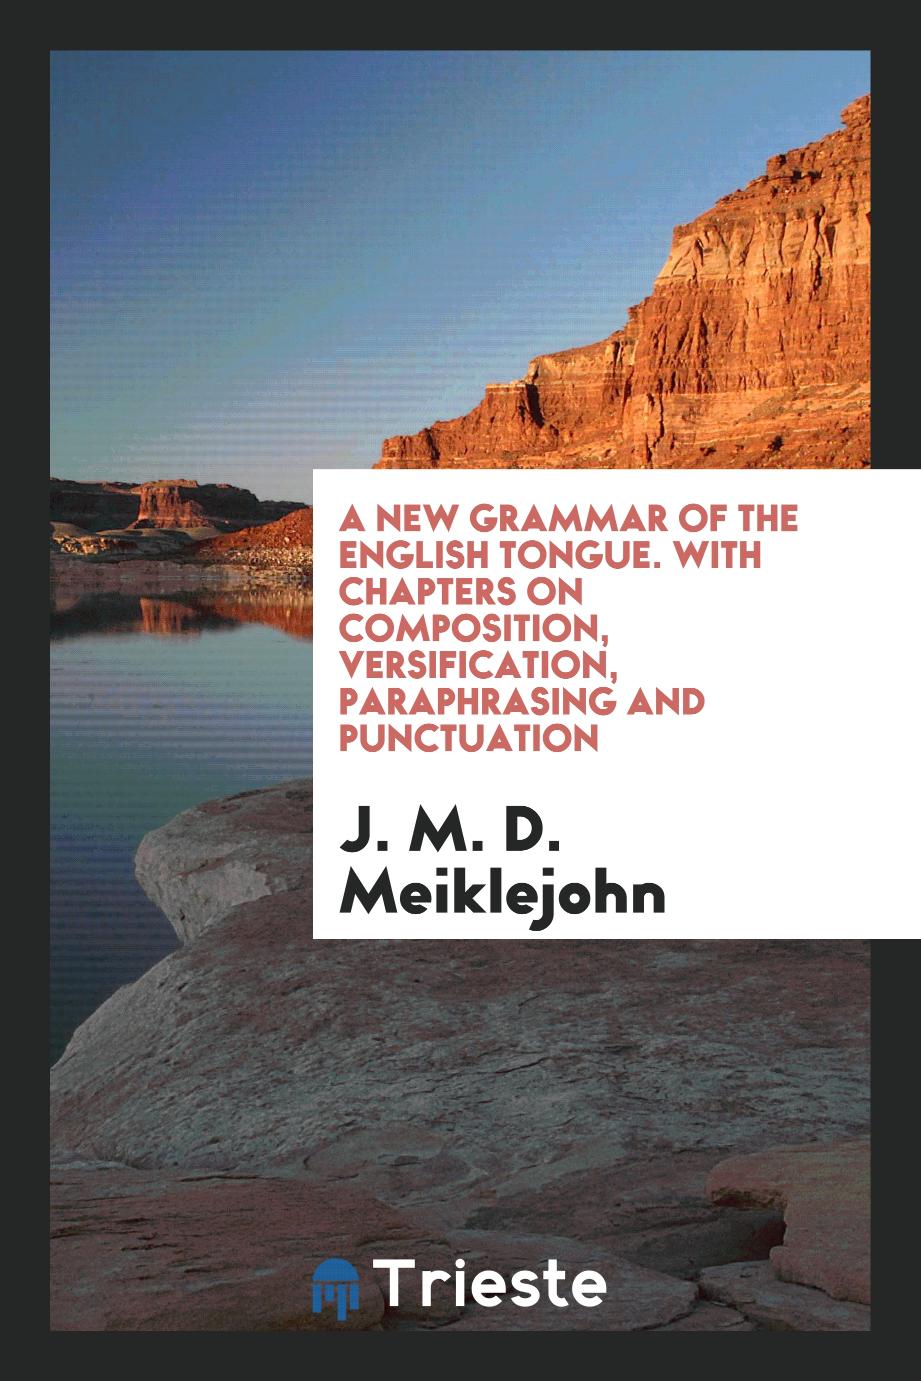 A New Grammar of the English Tongue. With Chapters on Composition, Versification, Paraphrasing and Punctuation